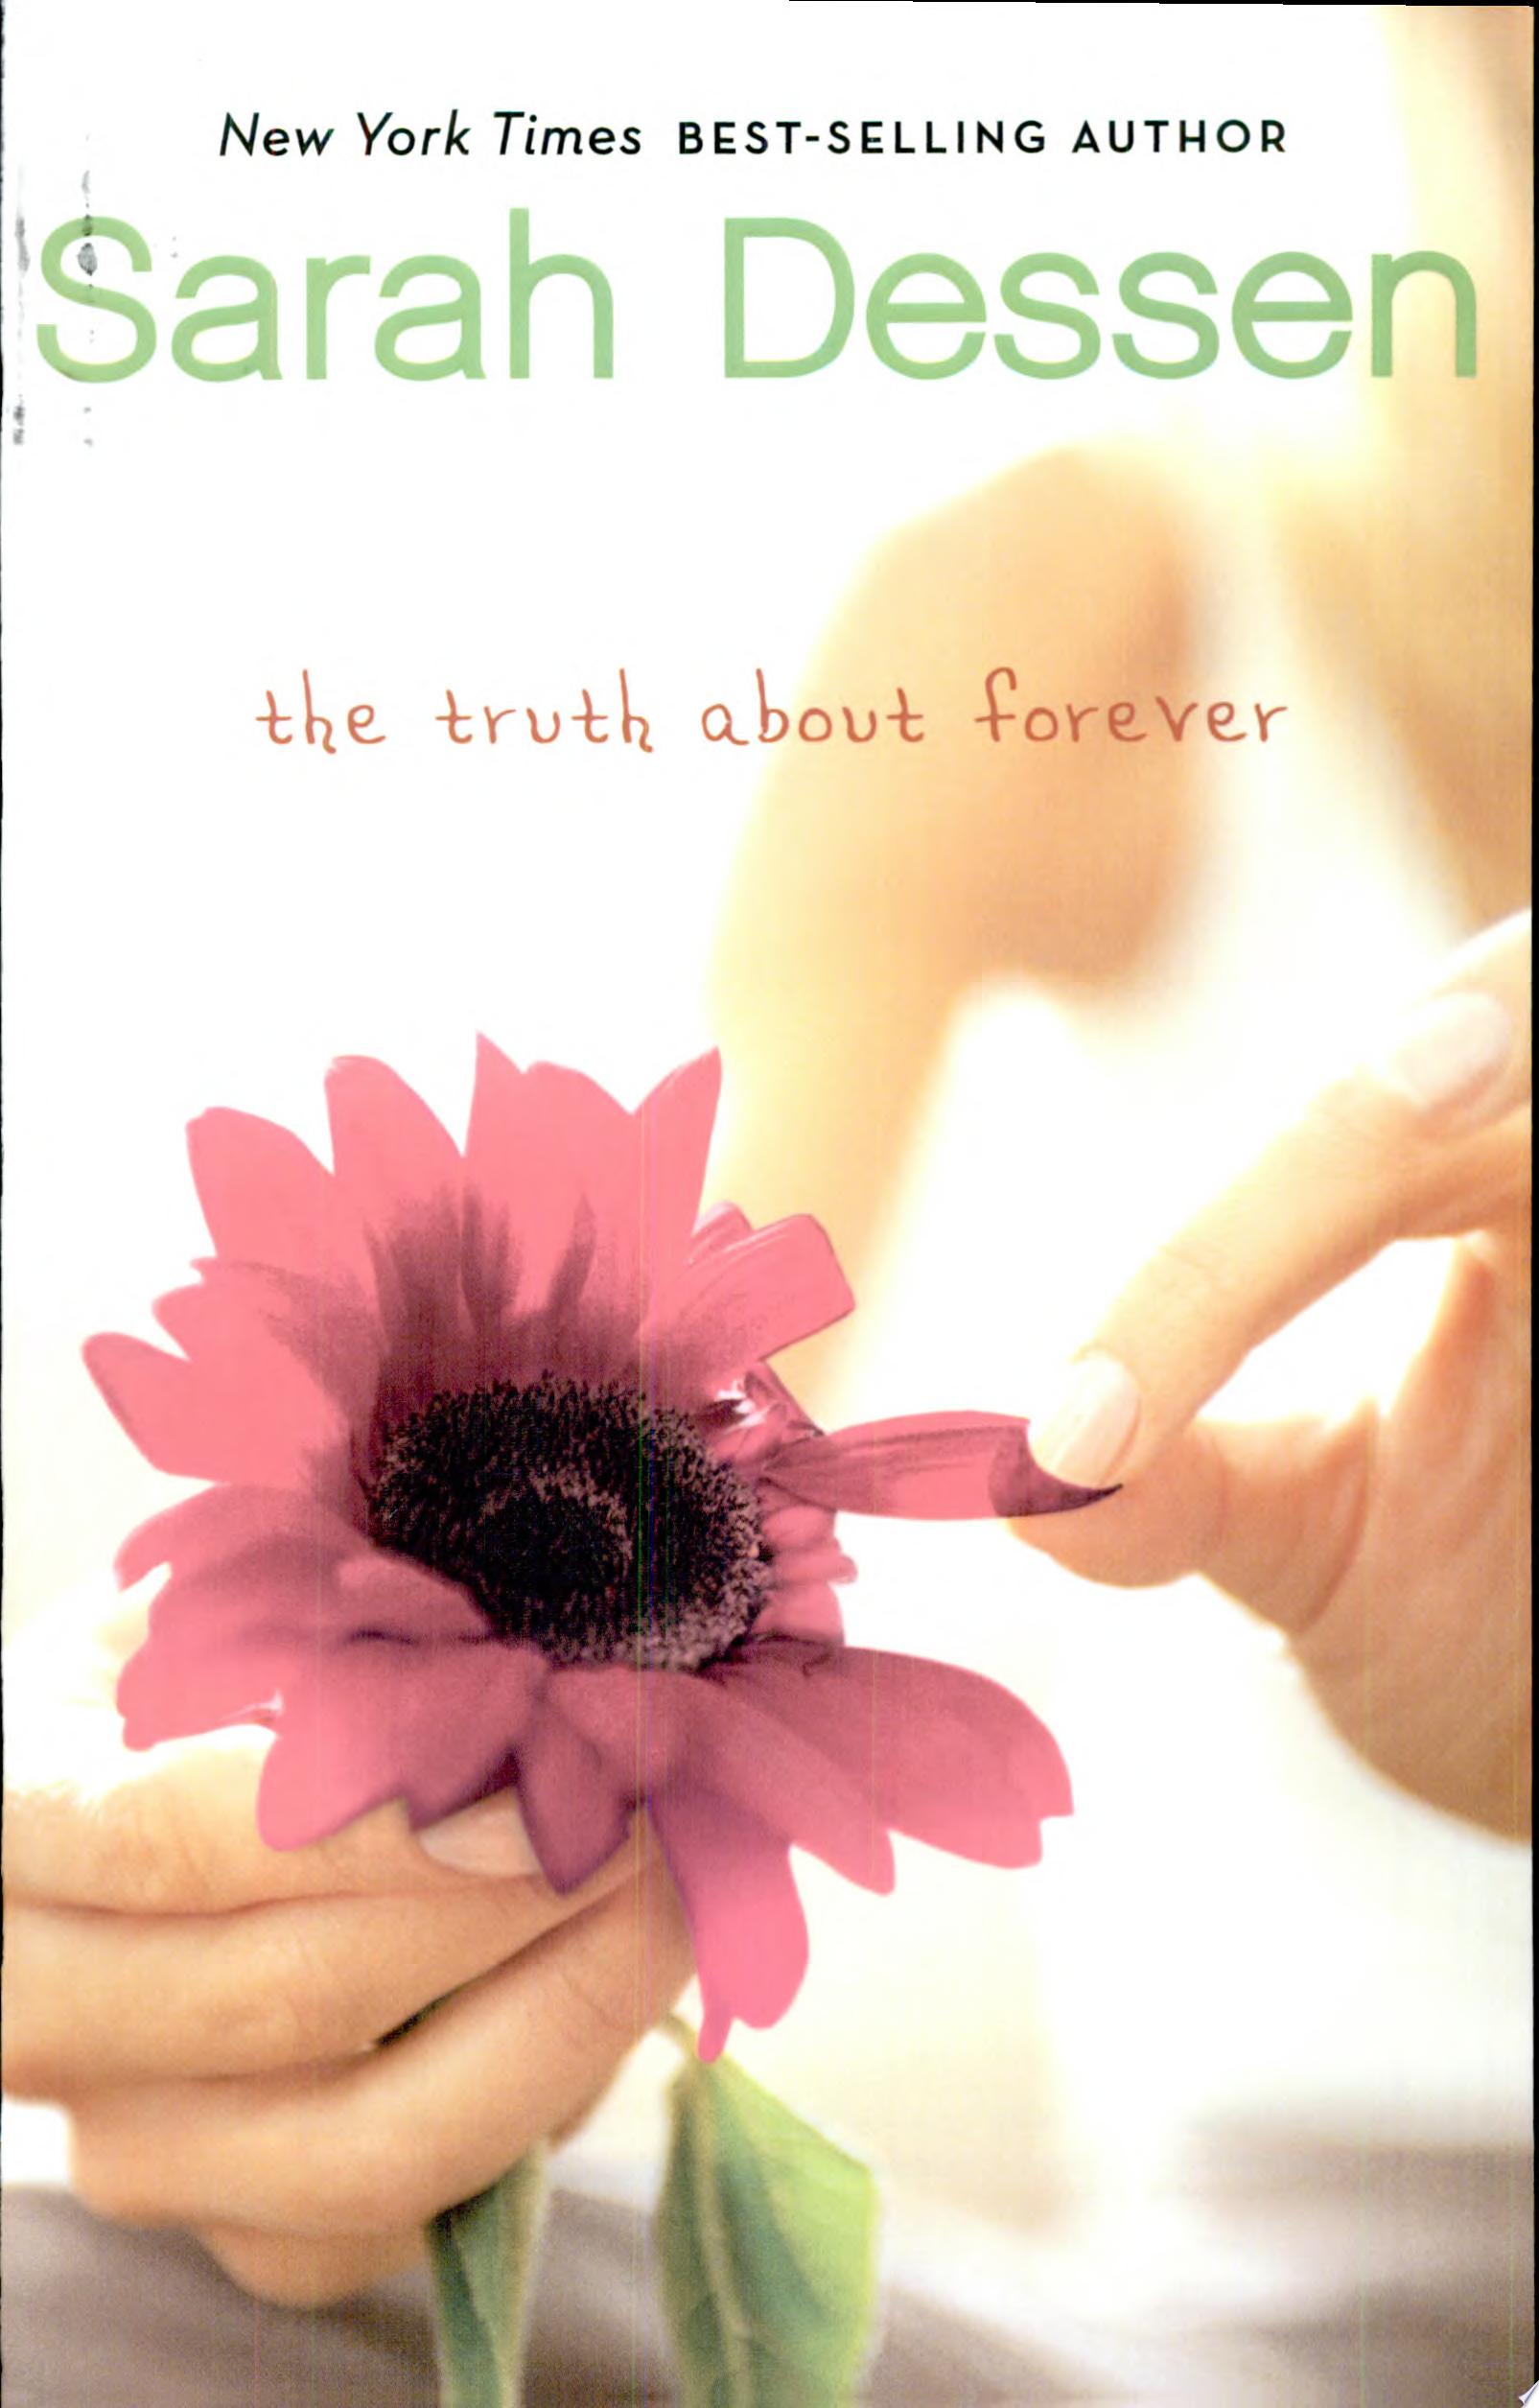 Image for "The Truth About Forever"